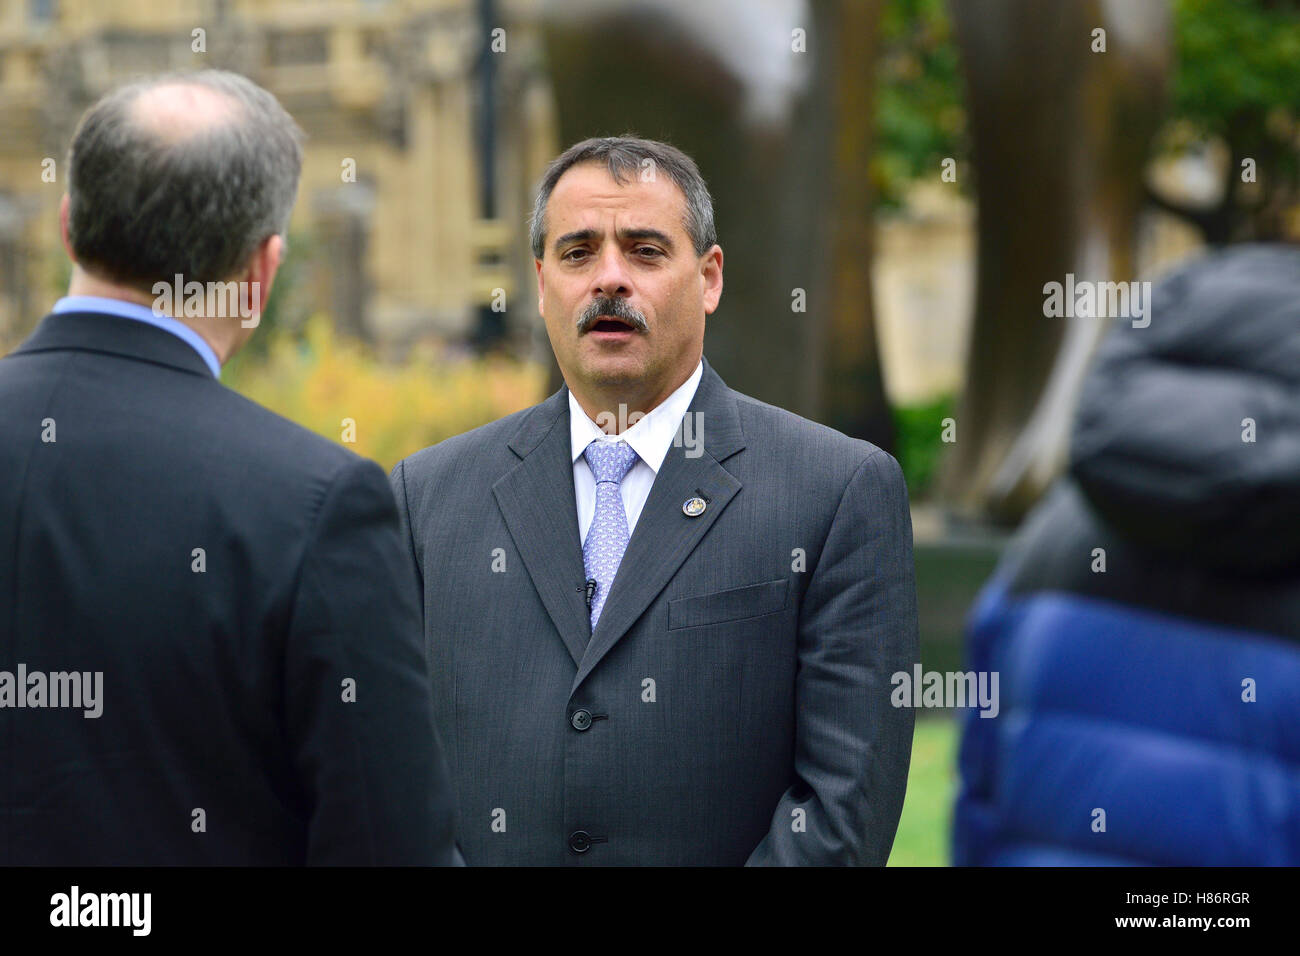 Thomas Galati - New York City Police Department Chief of Intelligence - interviewt am College Green, Westminster, Stockfoto